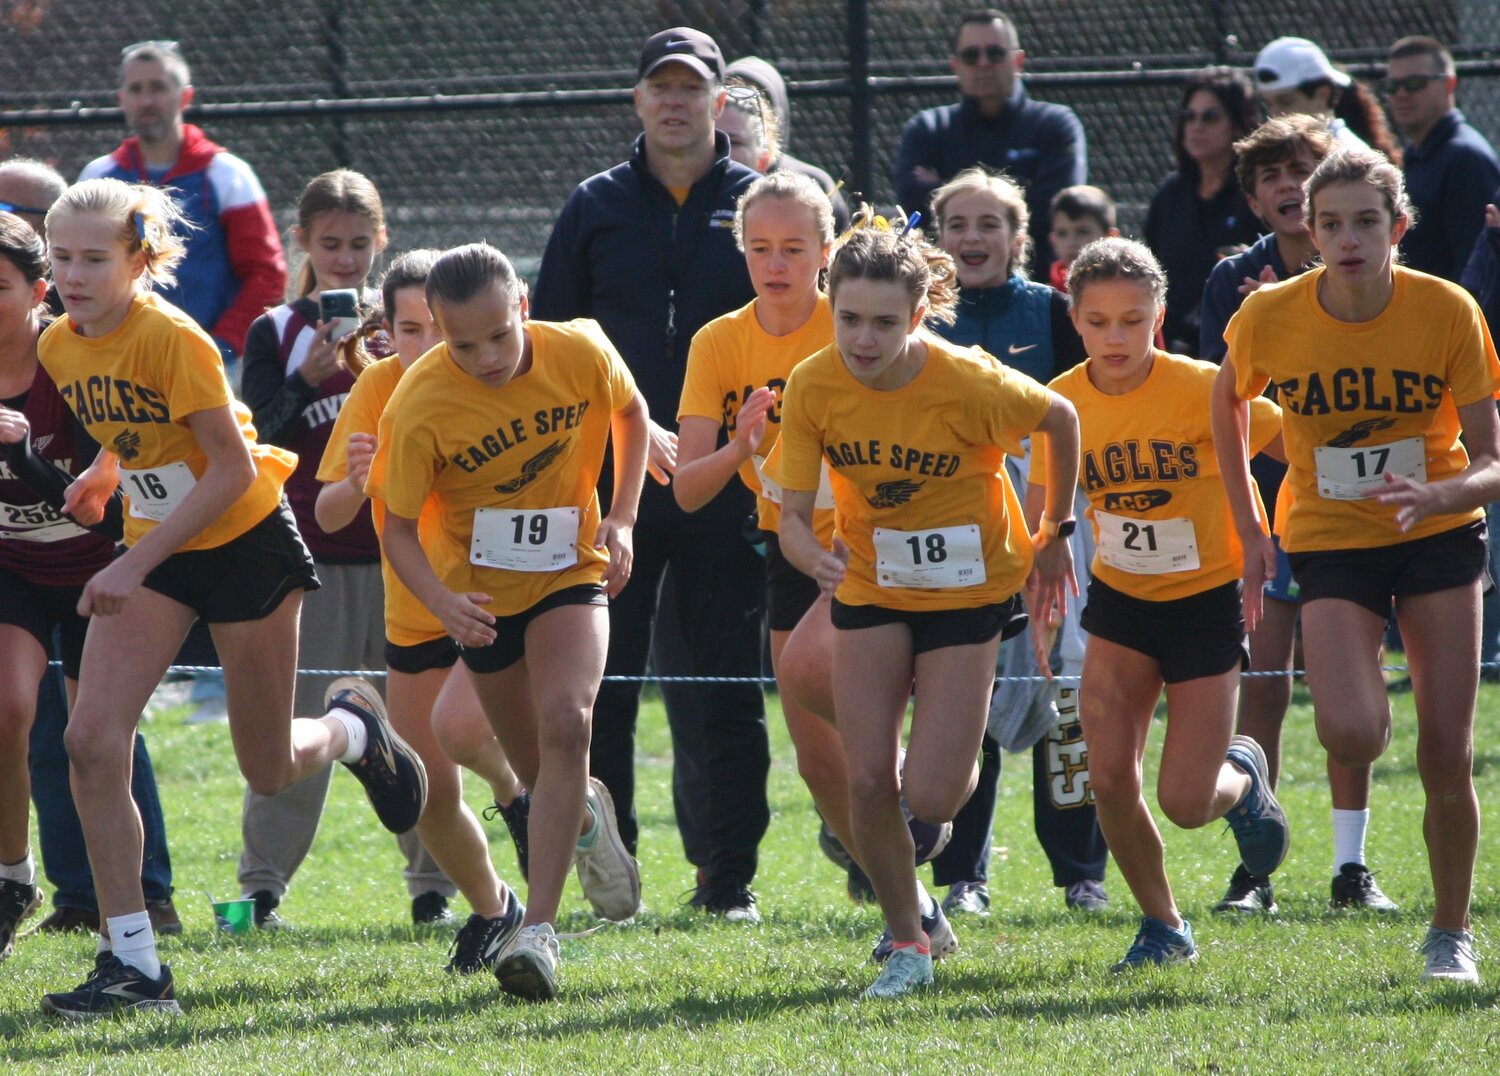 Barrington Middle School runners (from left to right) Kendall Blaney, Molly Reagan, Carley Gill, Abby Glass, Gracie Gaines, Annabelle Meech, and Charlotte Farrell break from the starting line during the Oct. 22 state championship race at Ponaganset High School.